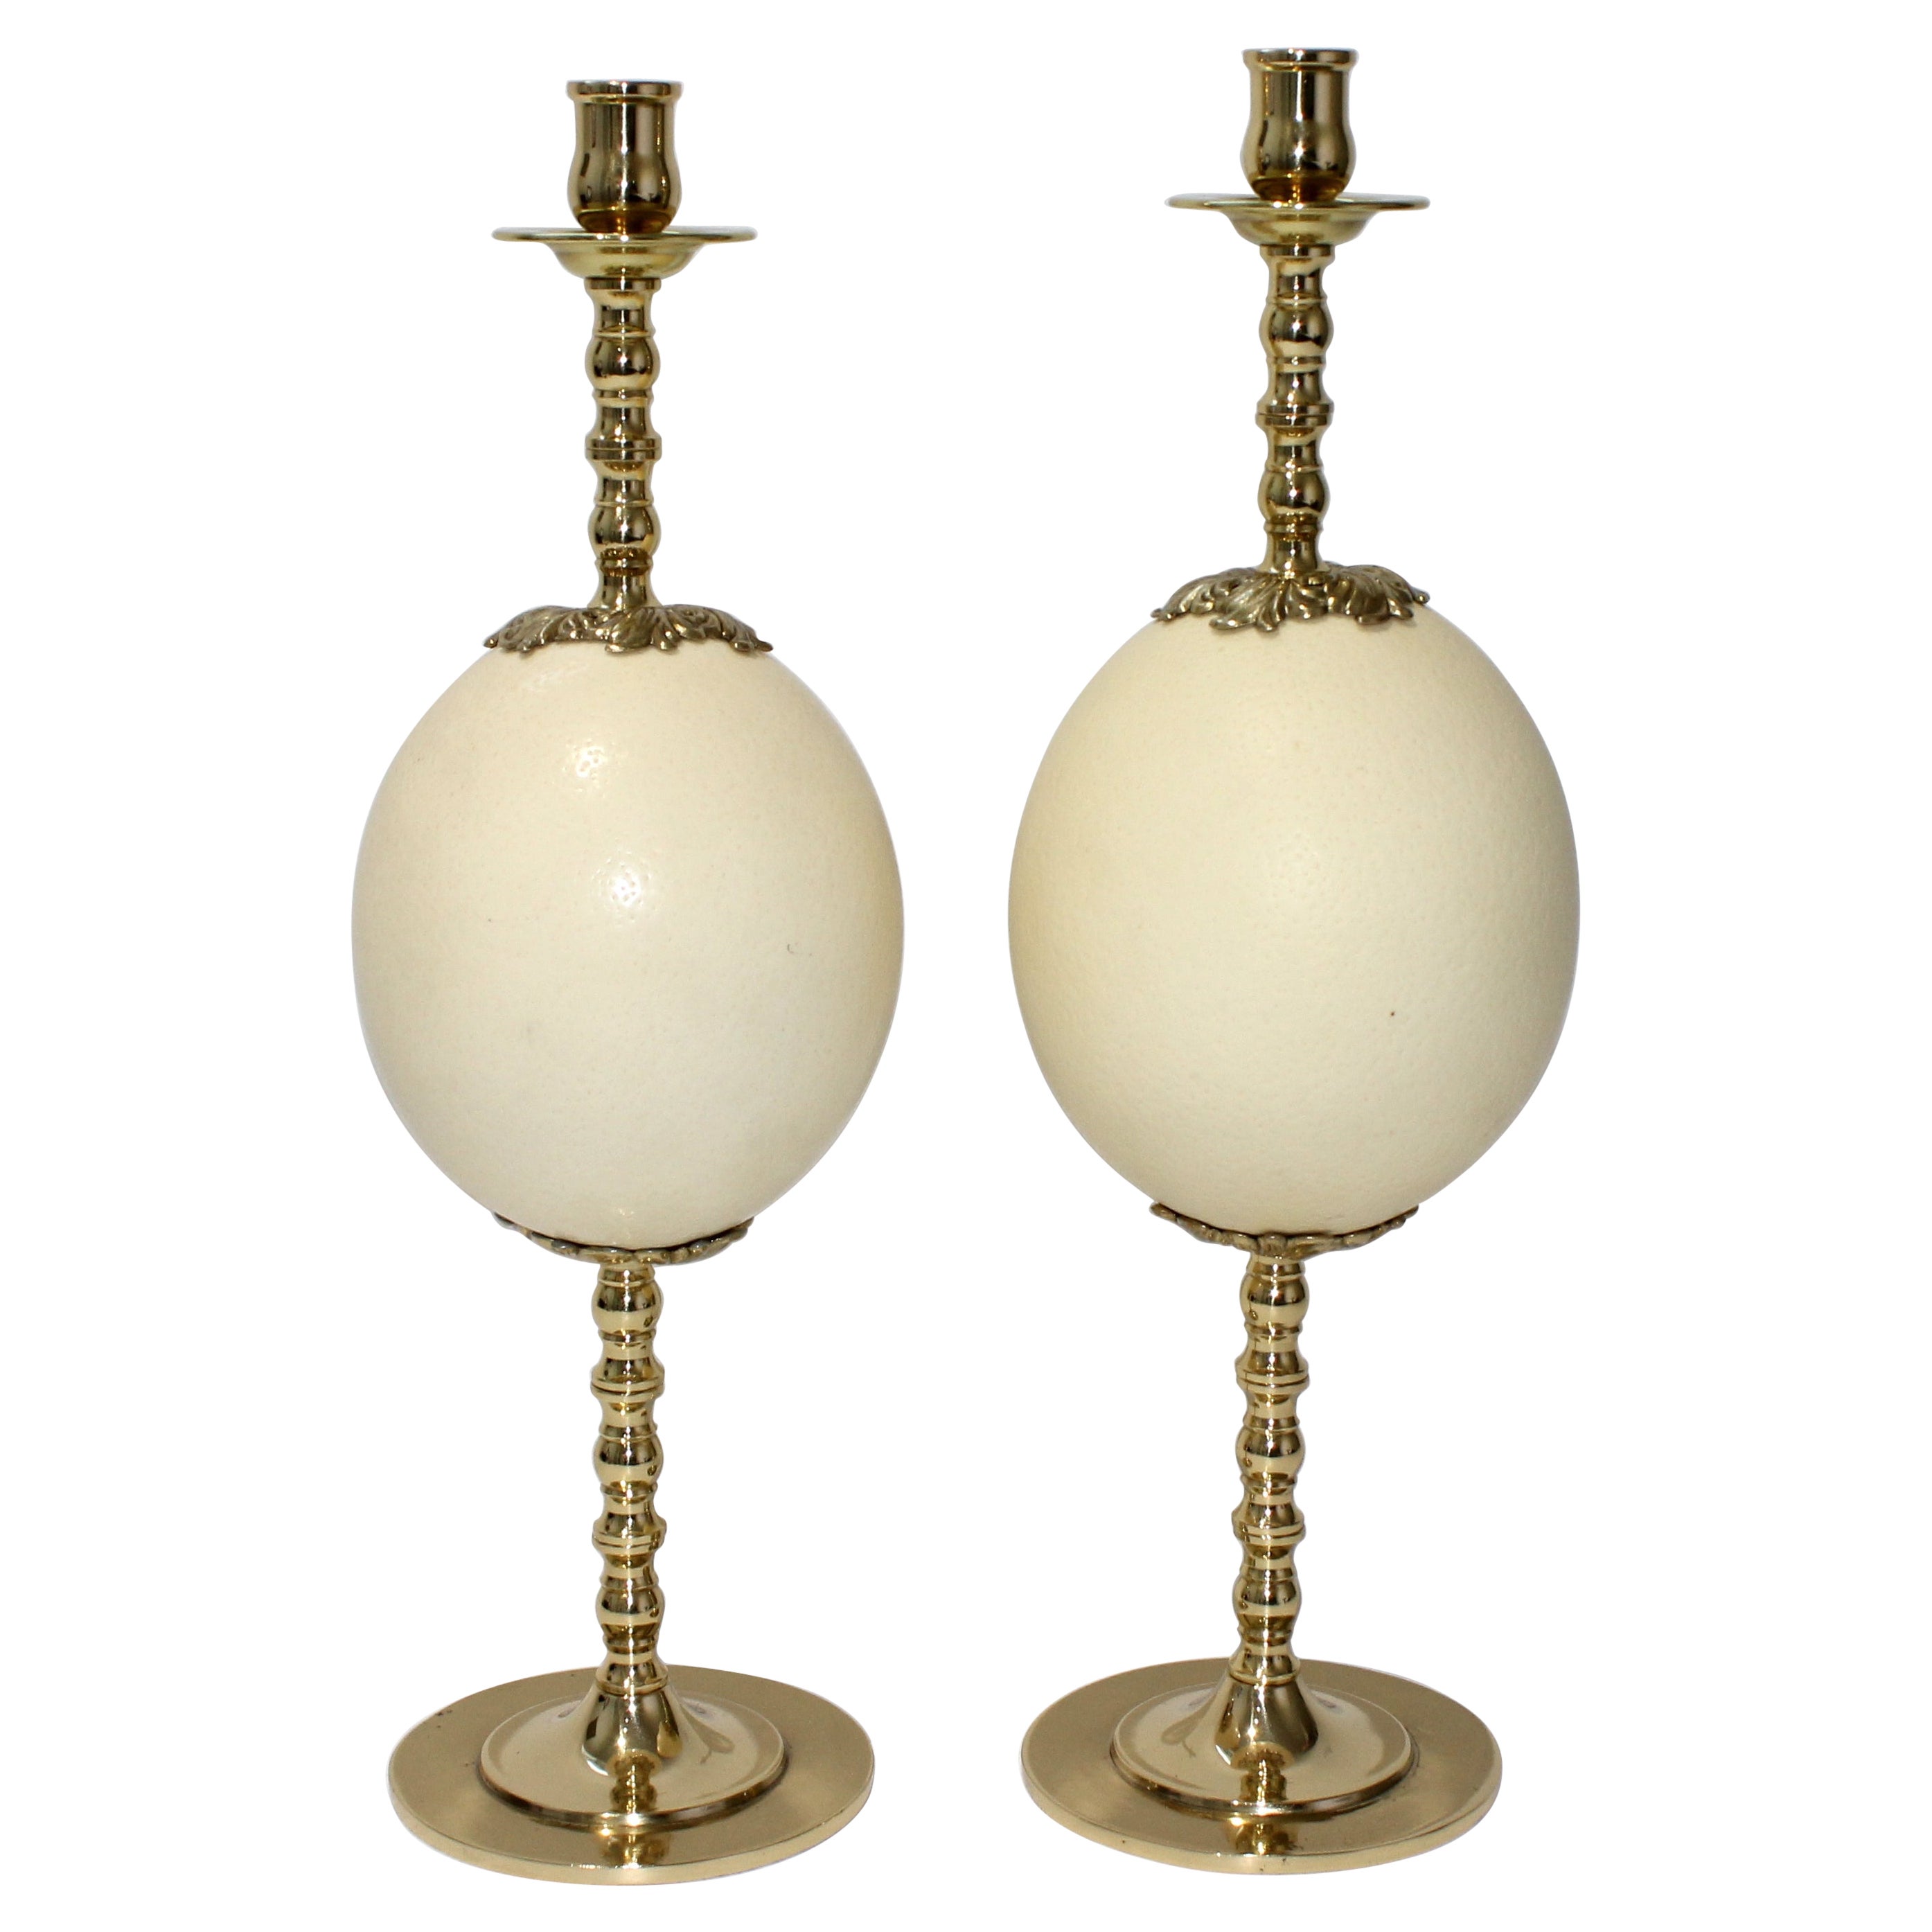 Set of Ostrich Egg Candlesticks Style of Tony Duquette